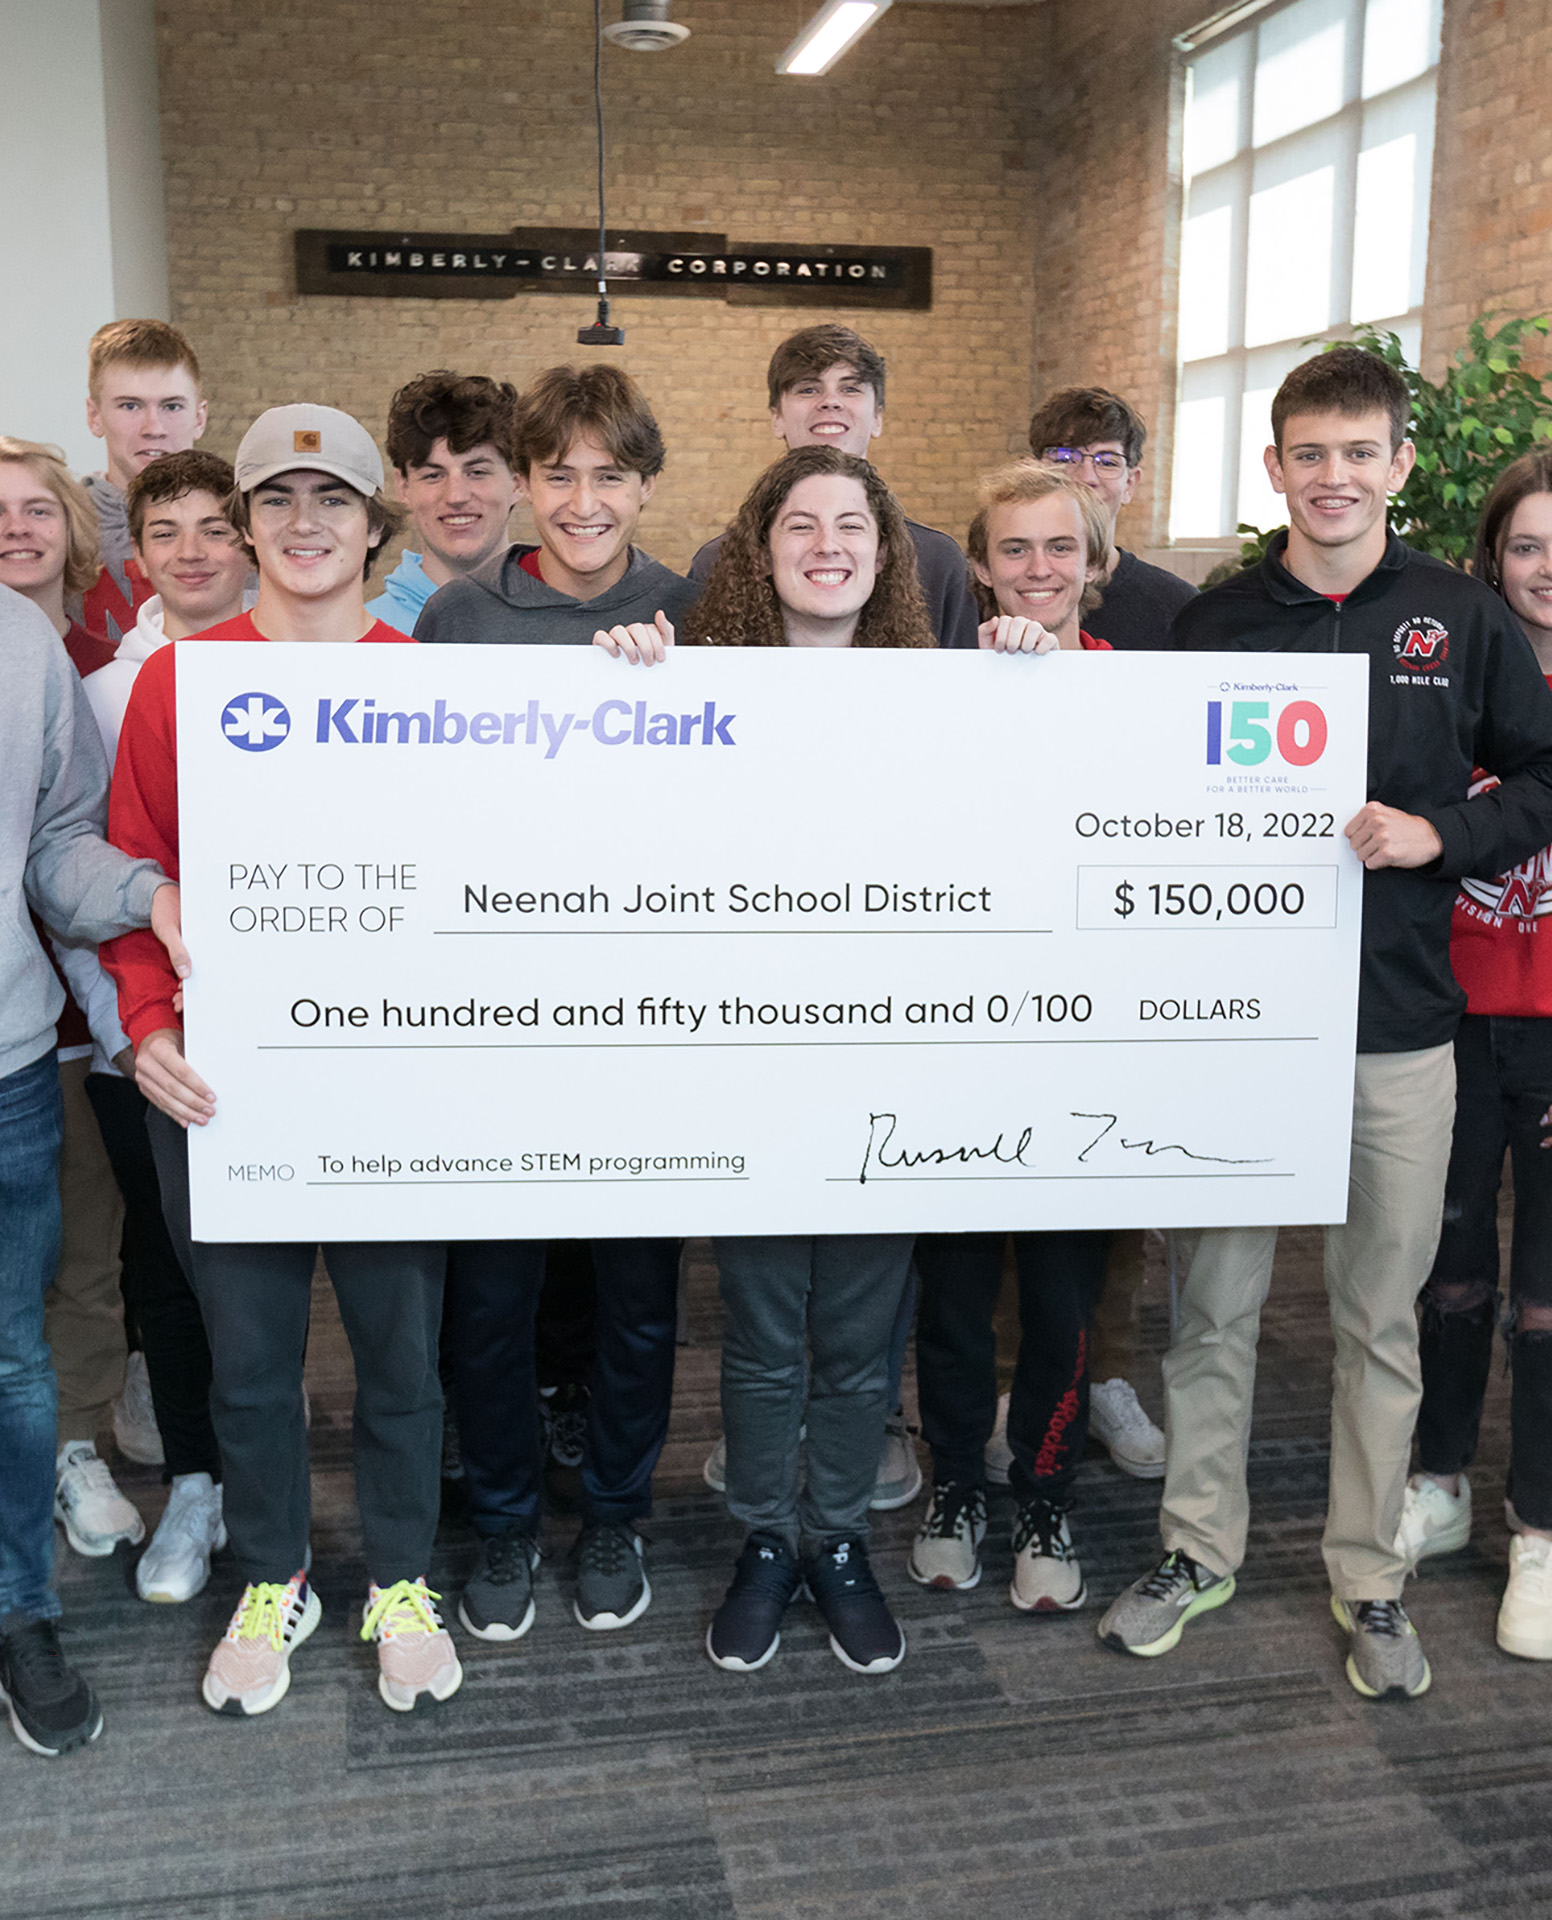 In honor of the company’s 150th anniversary, Kimberly-Clark’s team in North American donated a $150,000 grant to the Neenah Joint School District to be used to further STEM educational opportunities throughout the district.